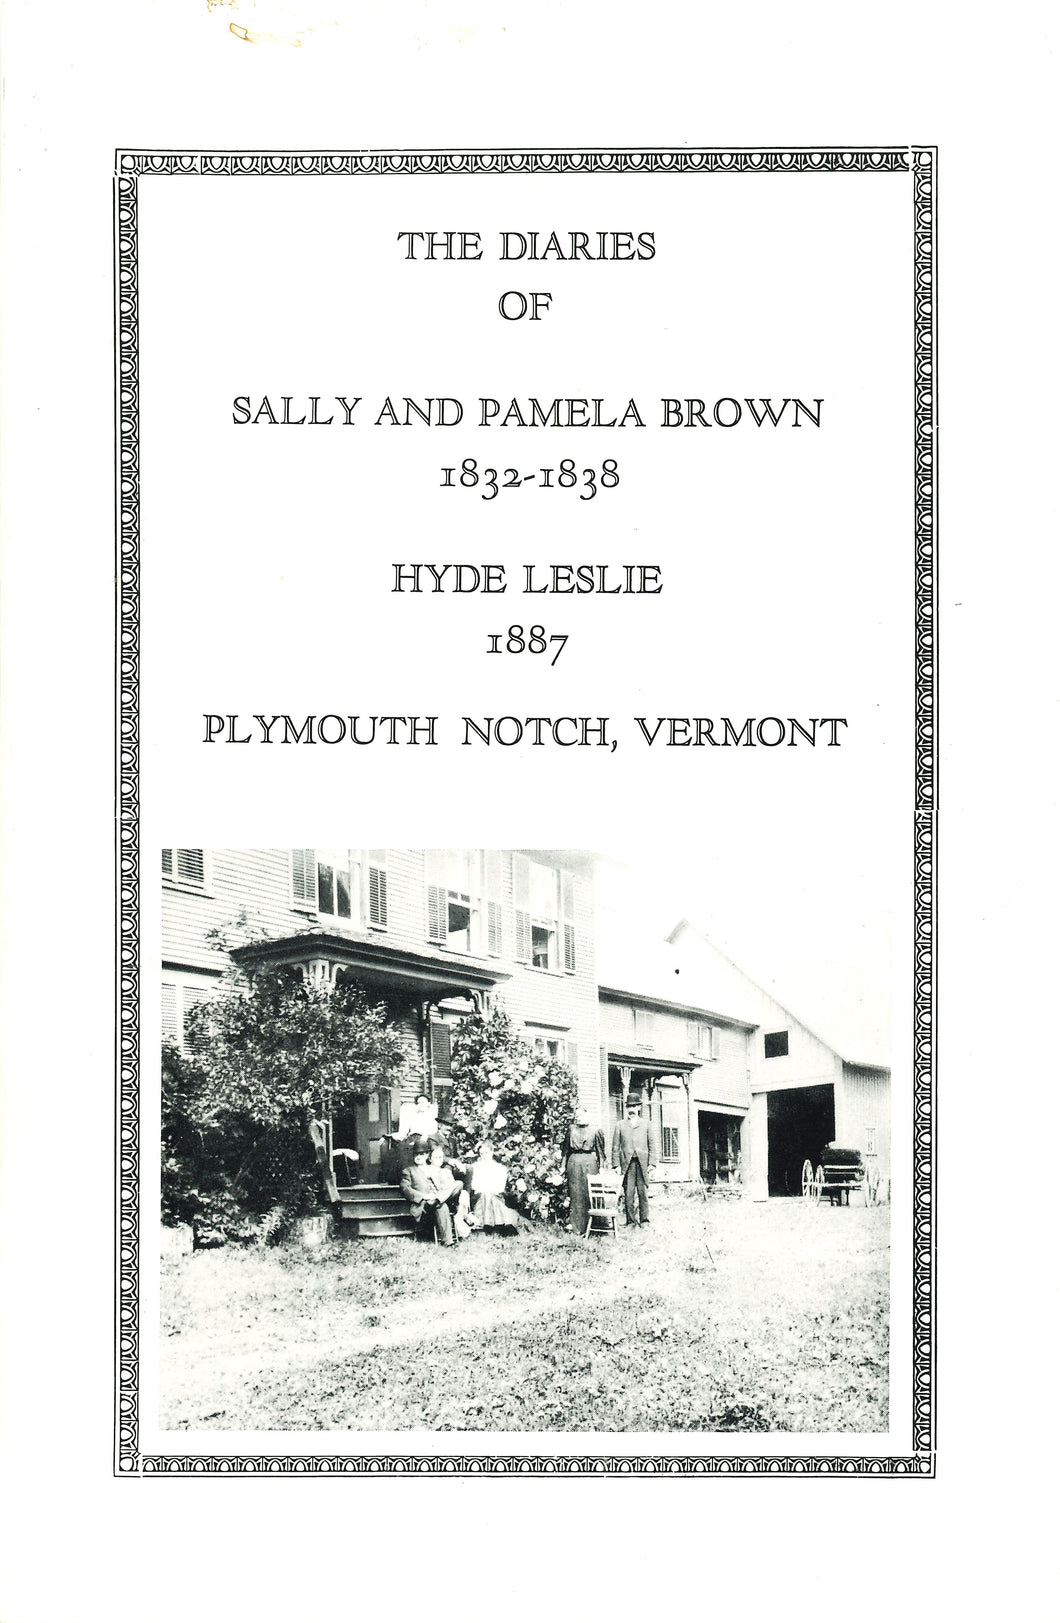 The Diaries of Sally & Pamela Brown and Hyde Leslie